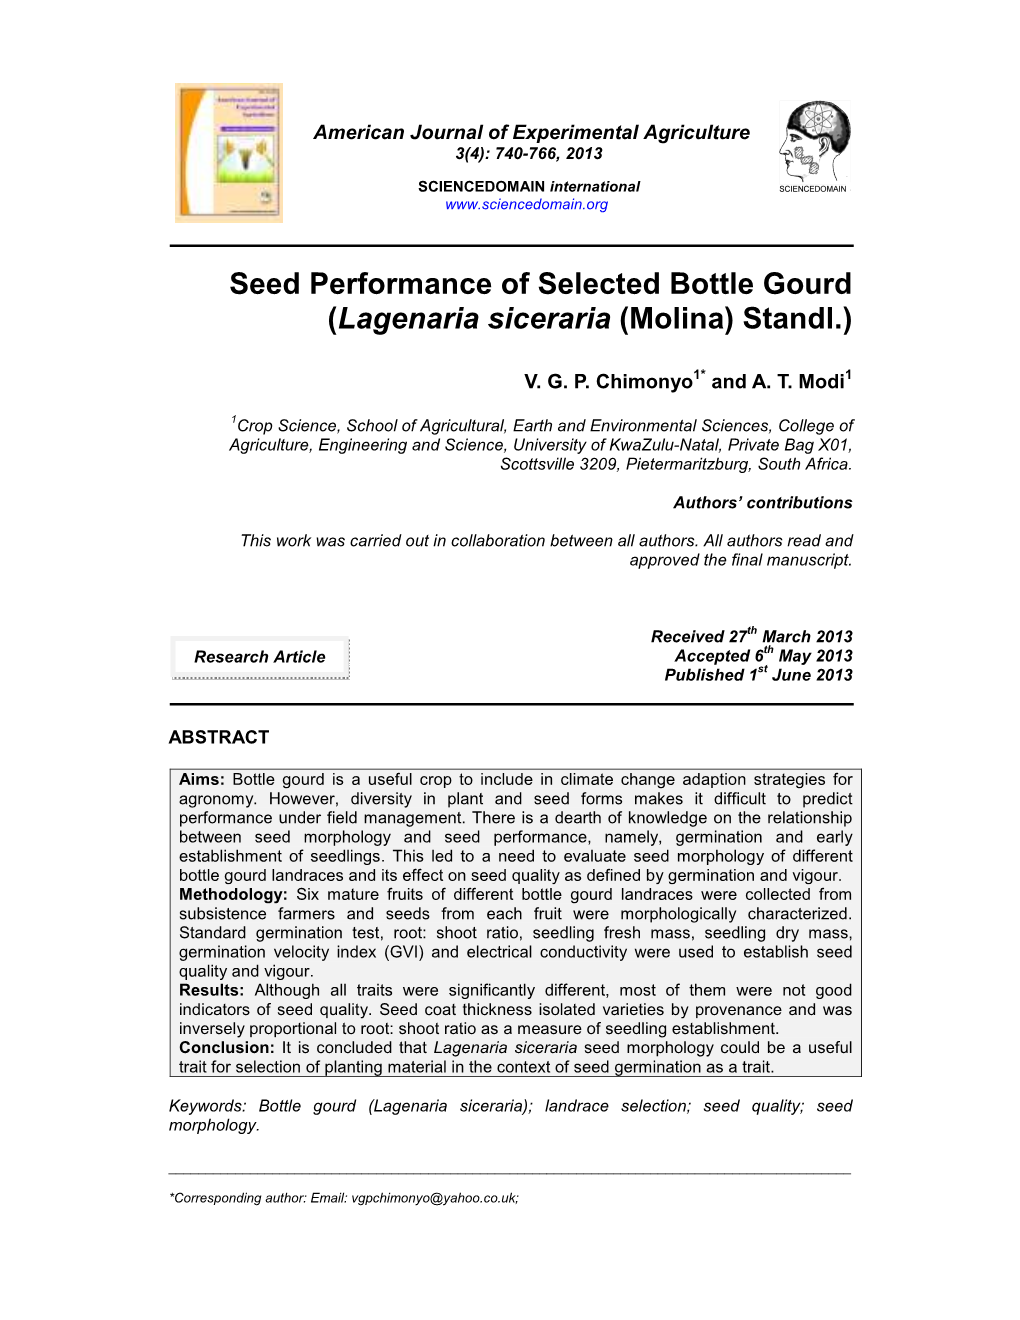 Seed Performance of Selected Bottle Gourd (Lagenaria Siceraria (Molina) Standl.)